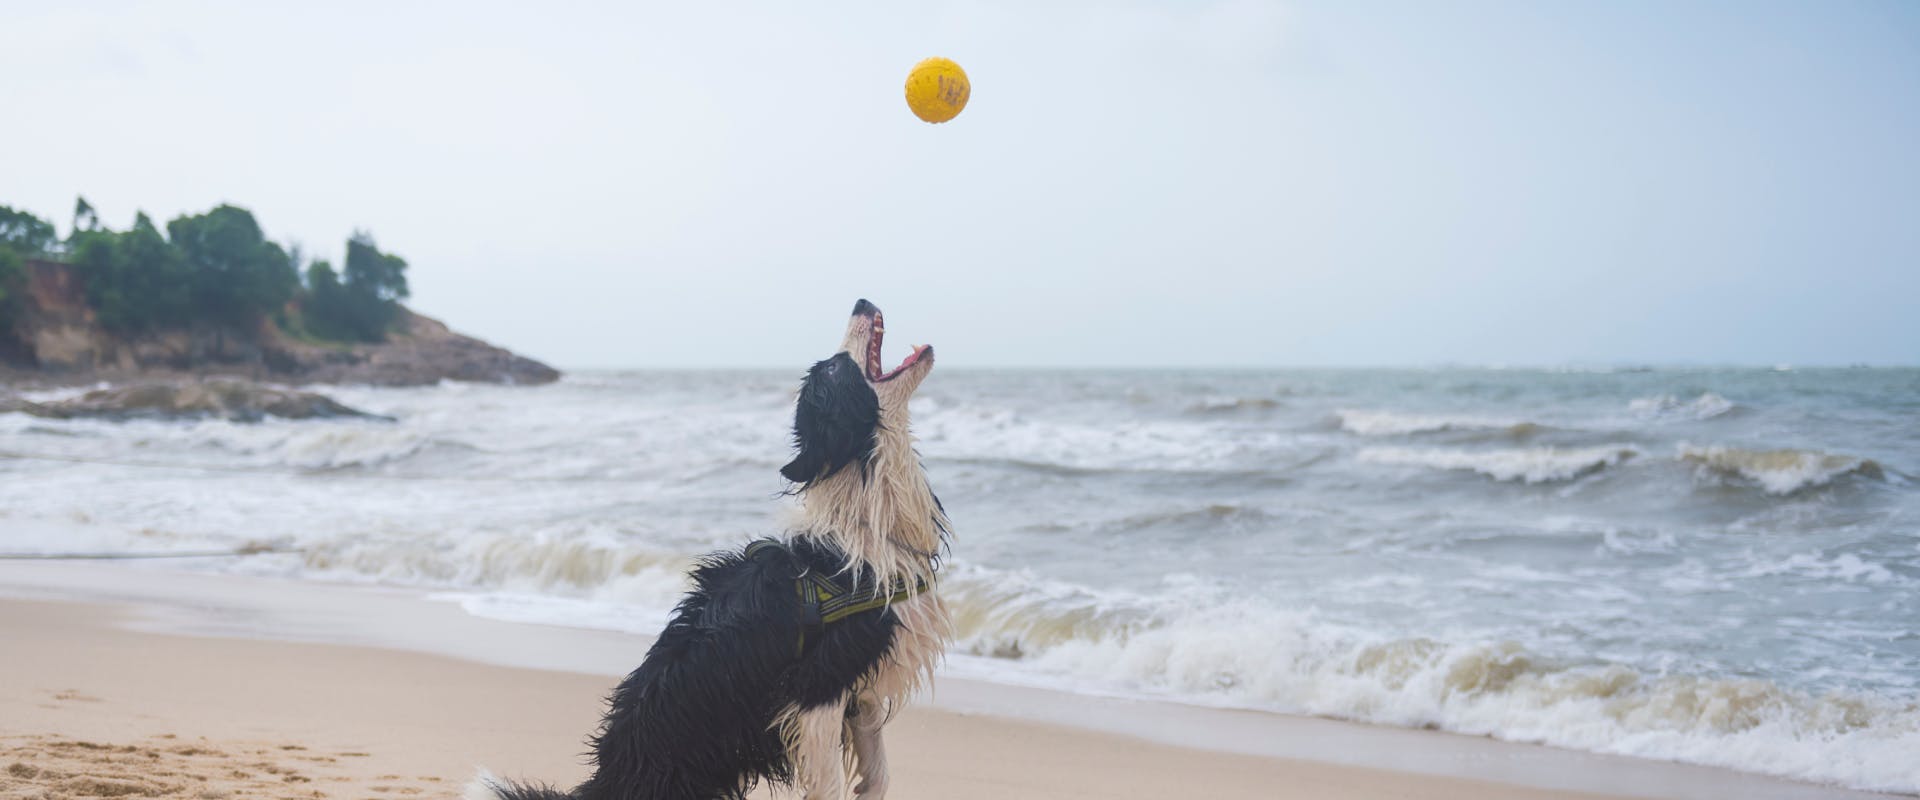 A dog at the beach jumping for a ball.